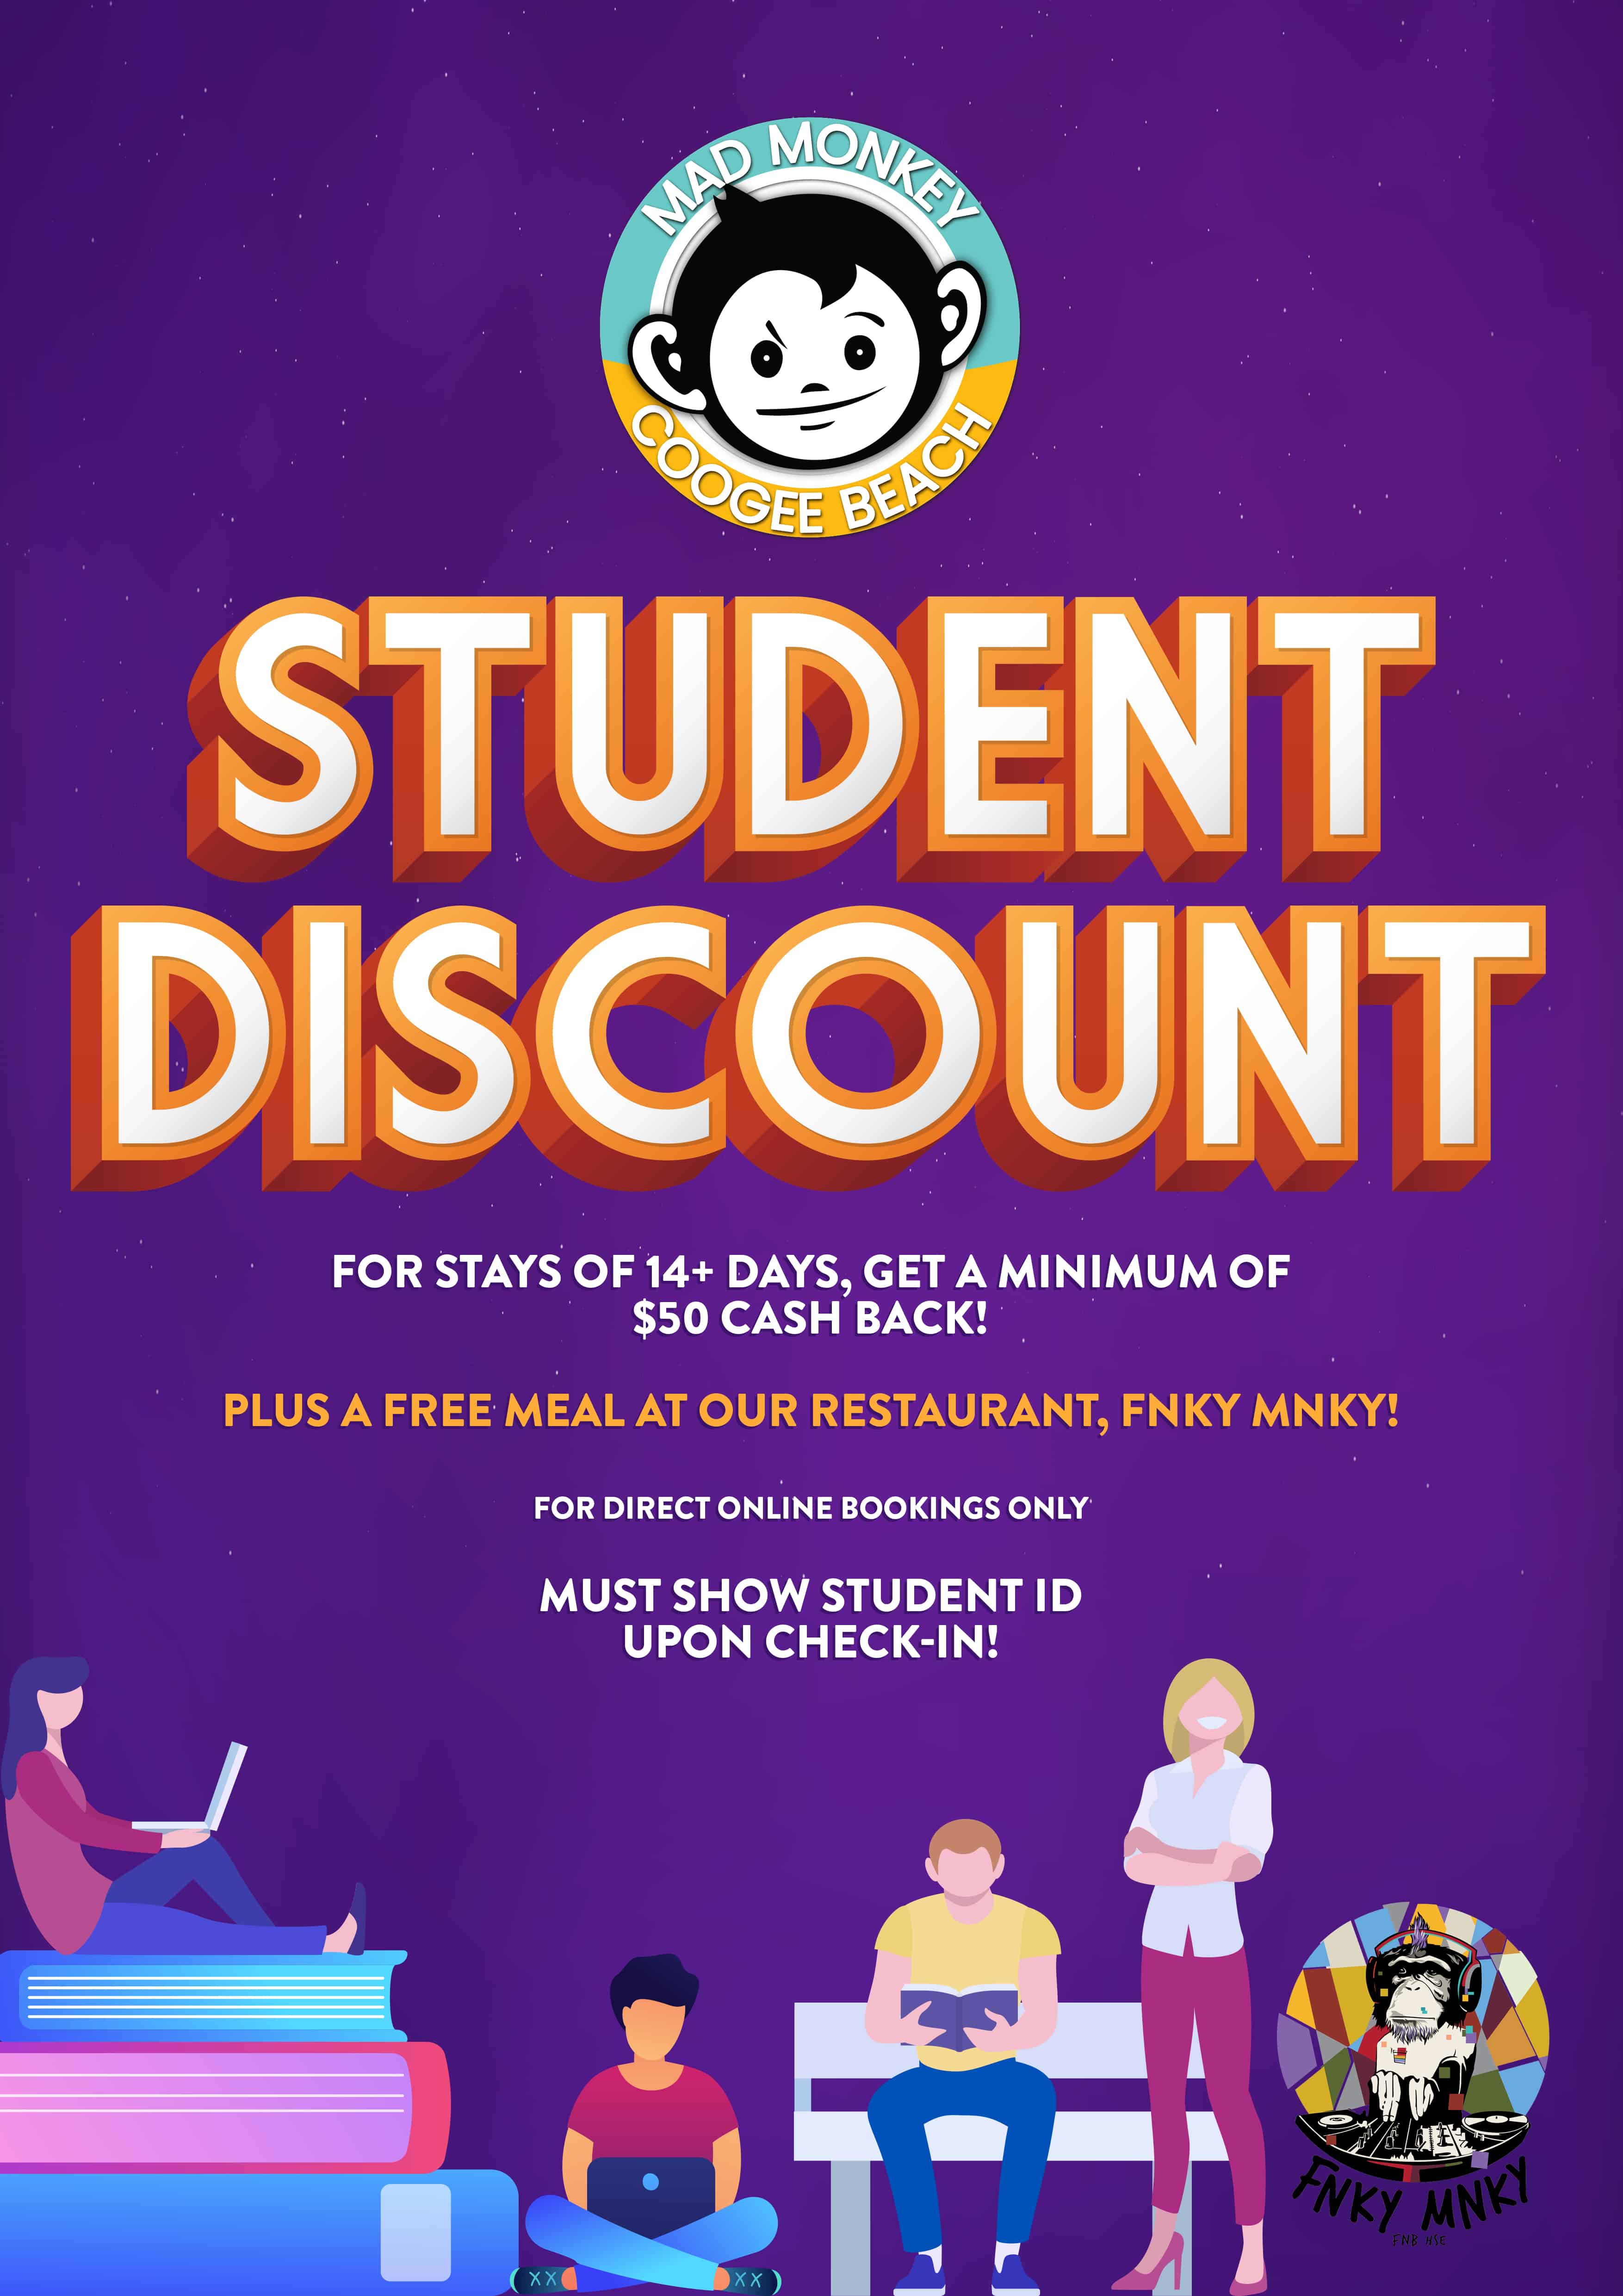 Mad Monkey Coogee Beach Student Discount - Winter Promotions and Discounts at Mad Monkey Coogee Beach